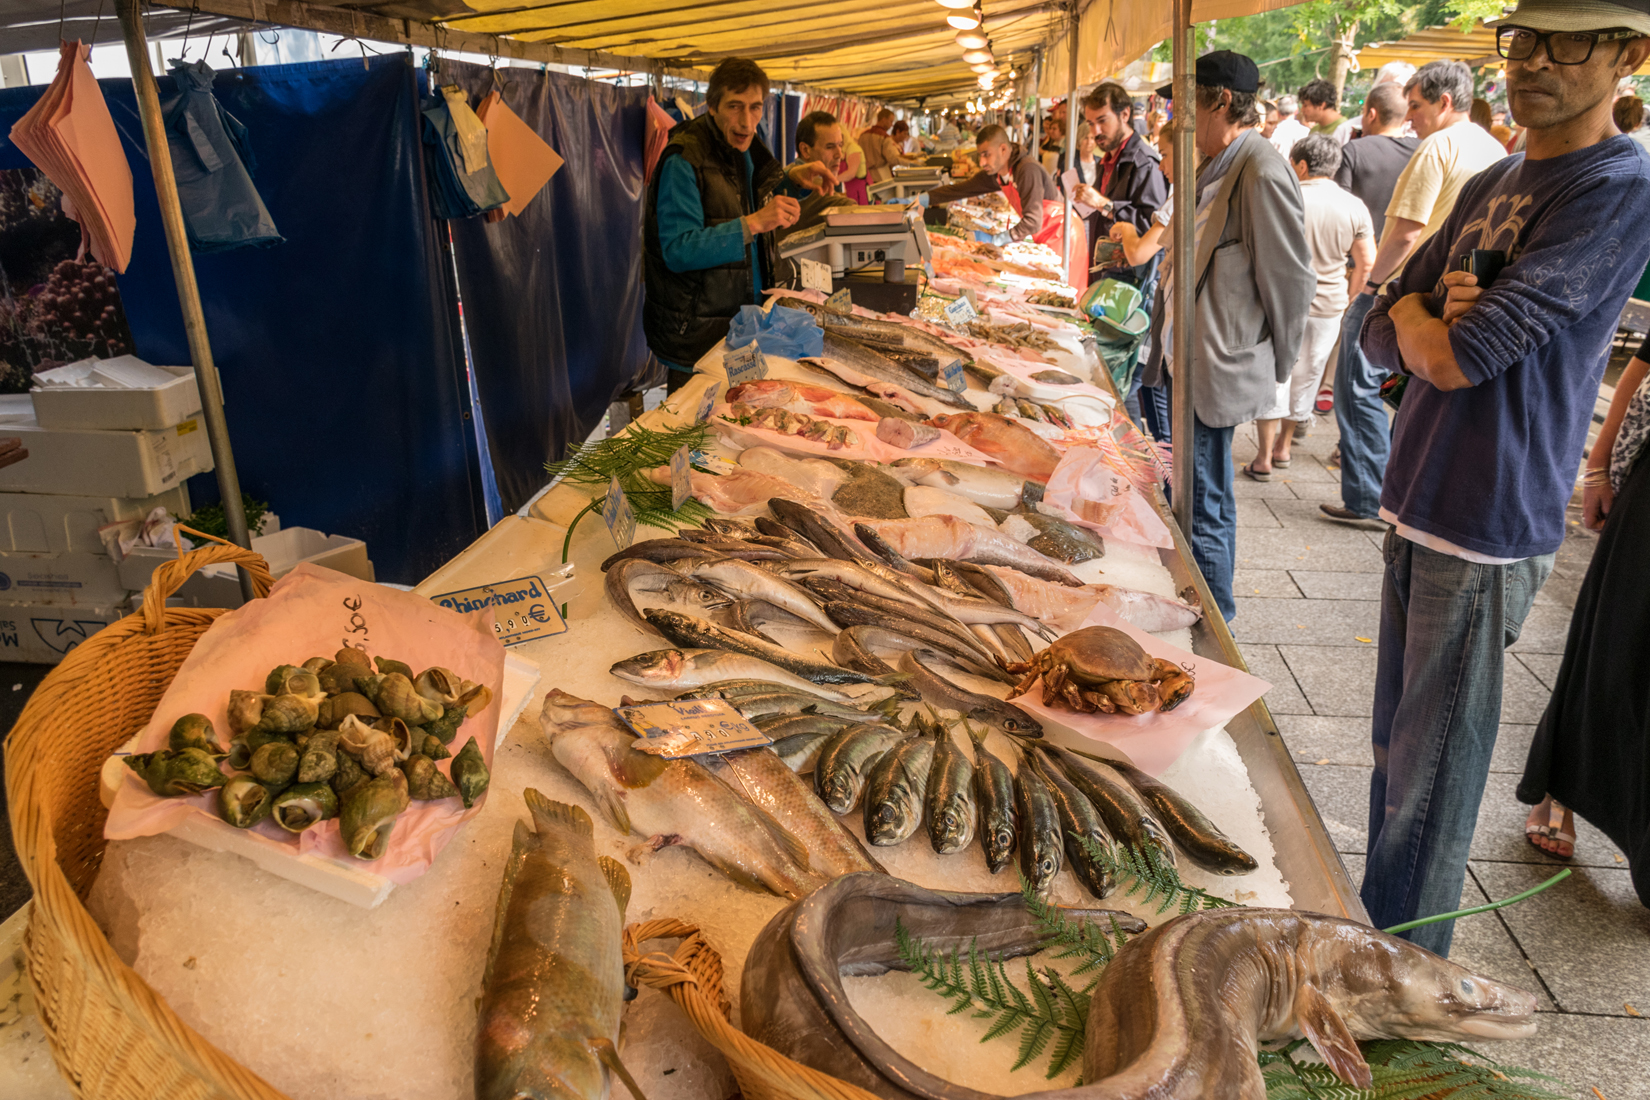 The mid-morning sun is already beginning to fall on this display of fresh fish on ice